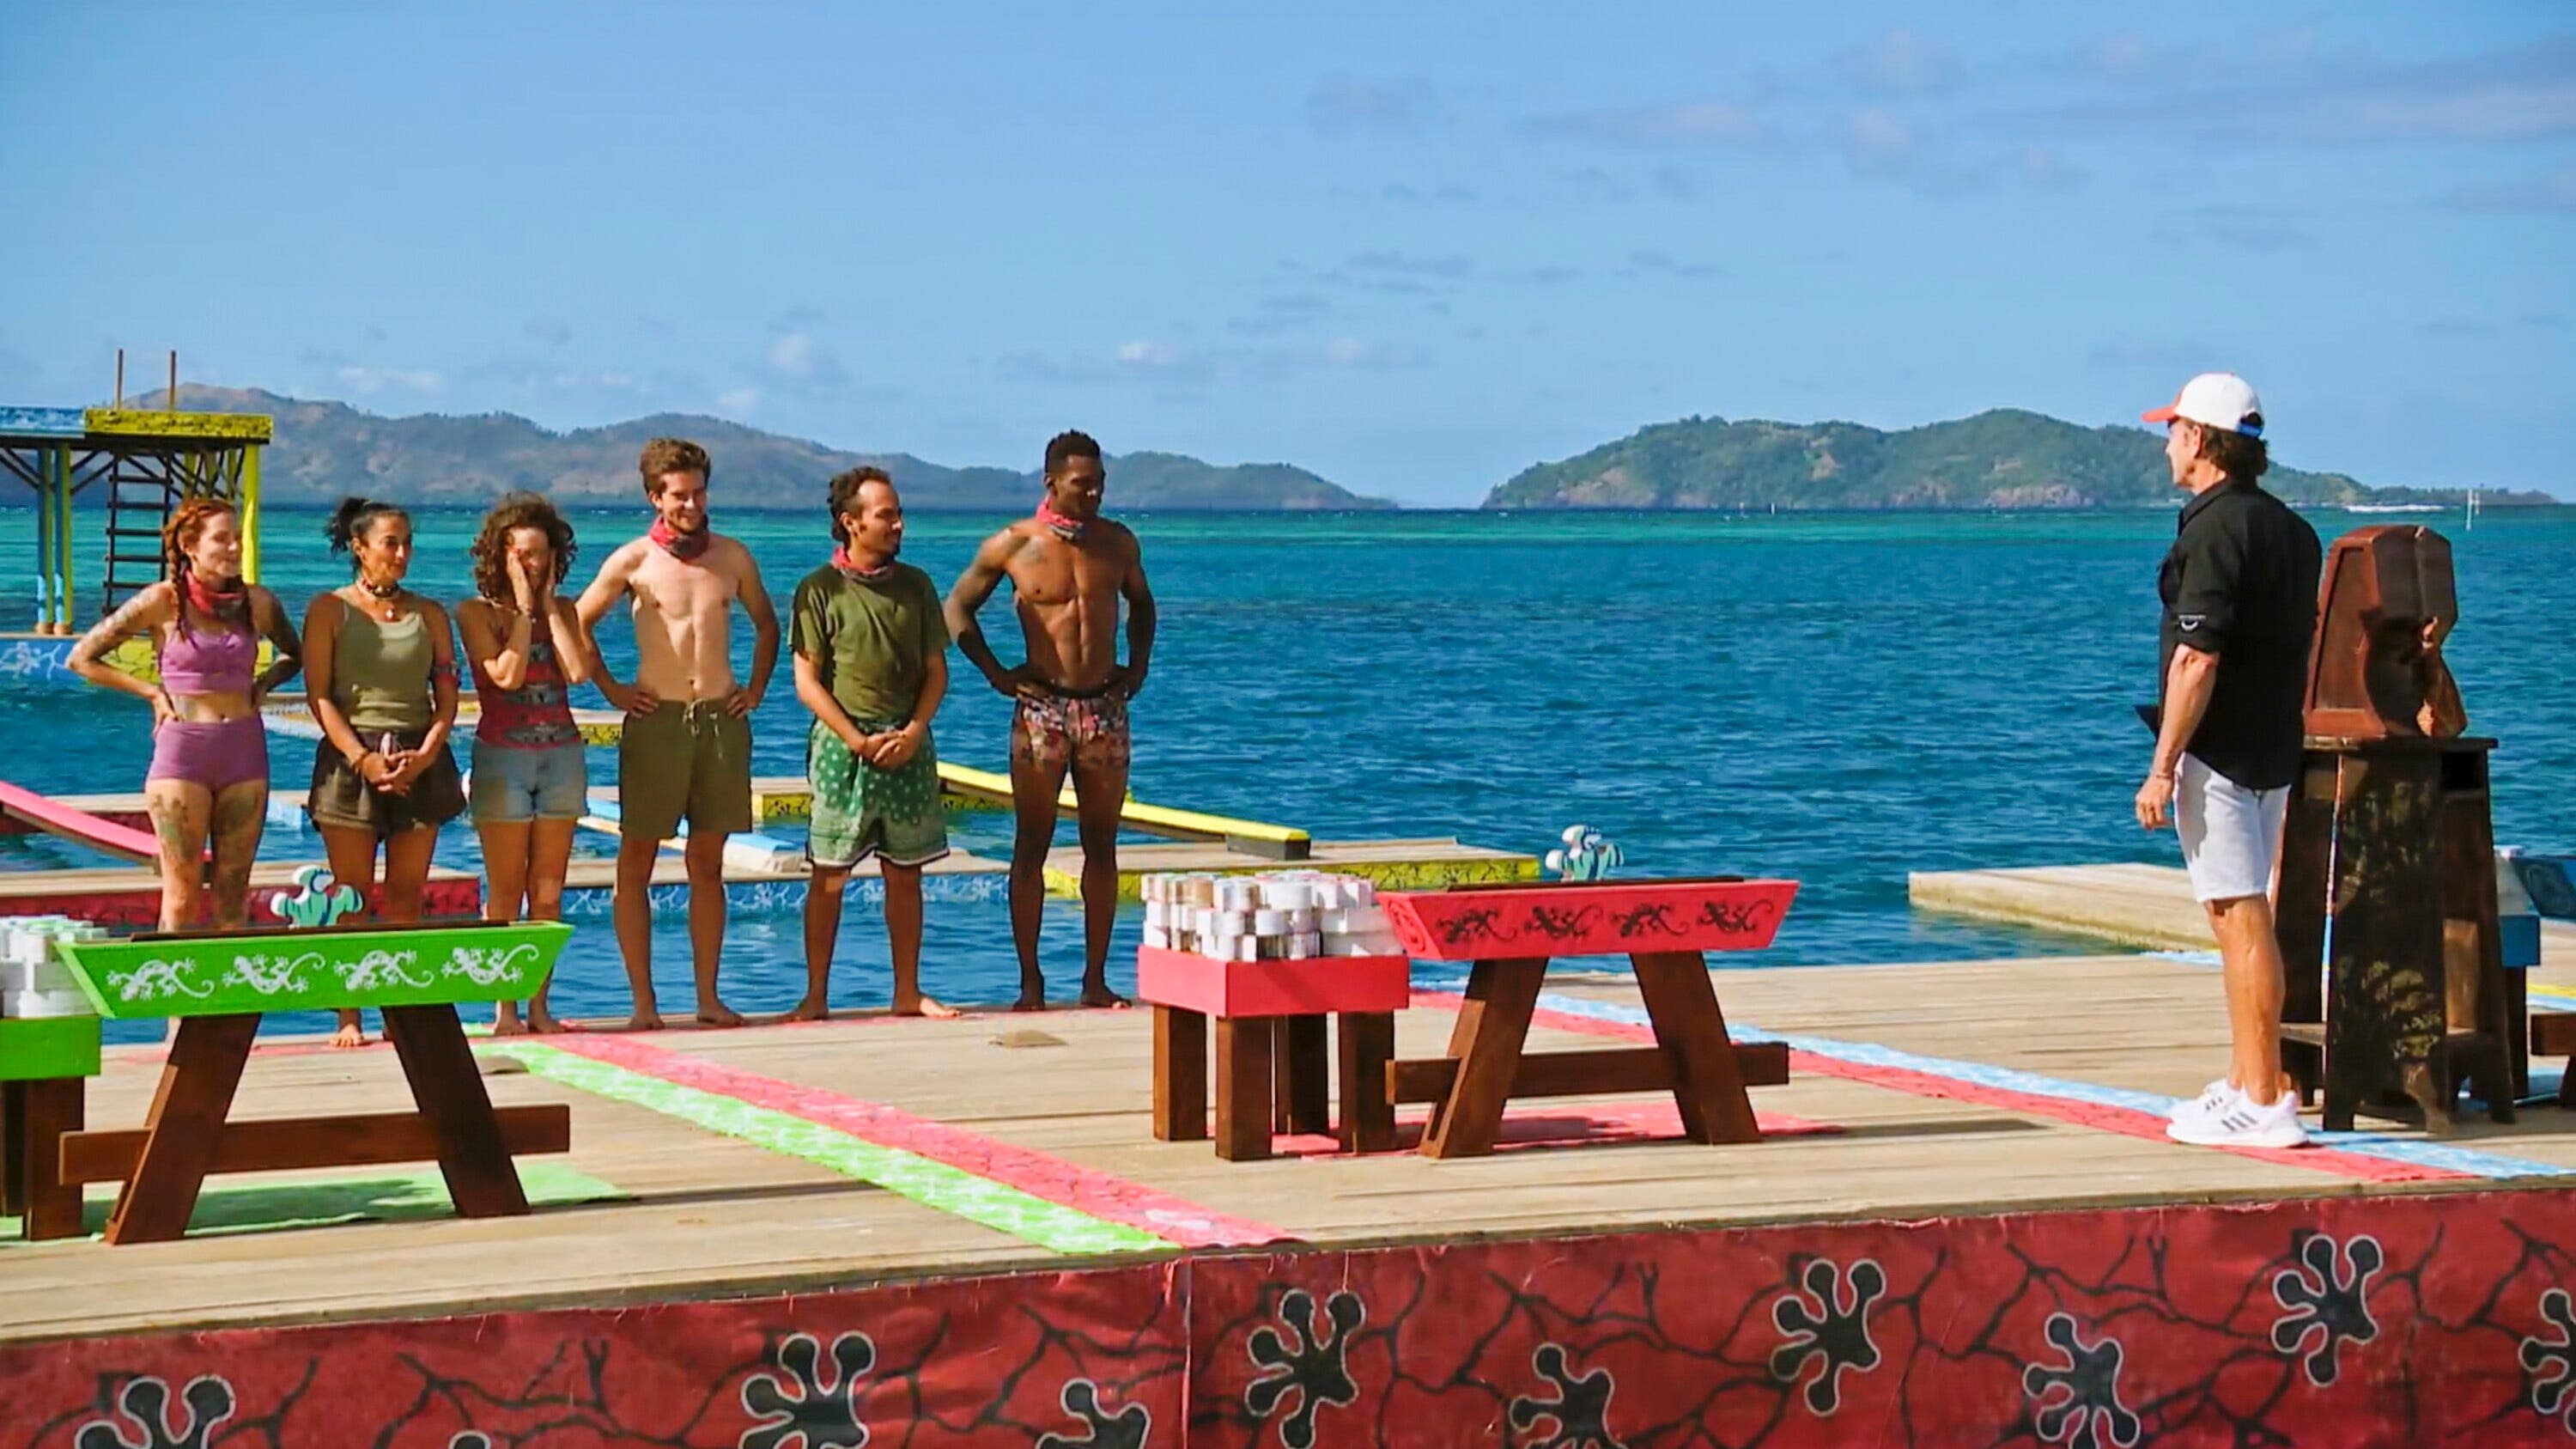 'Survivor' recap: Who was voted off Wednesday night? Who made the Top 5?